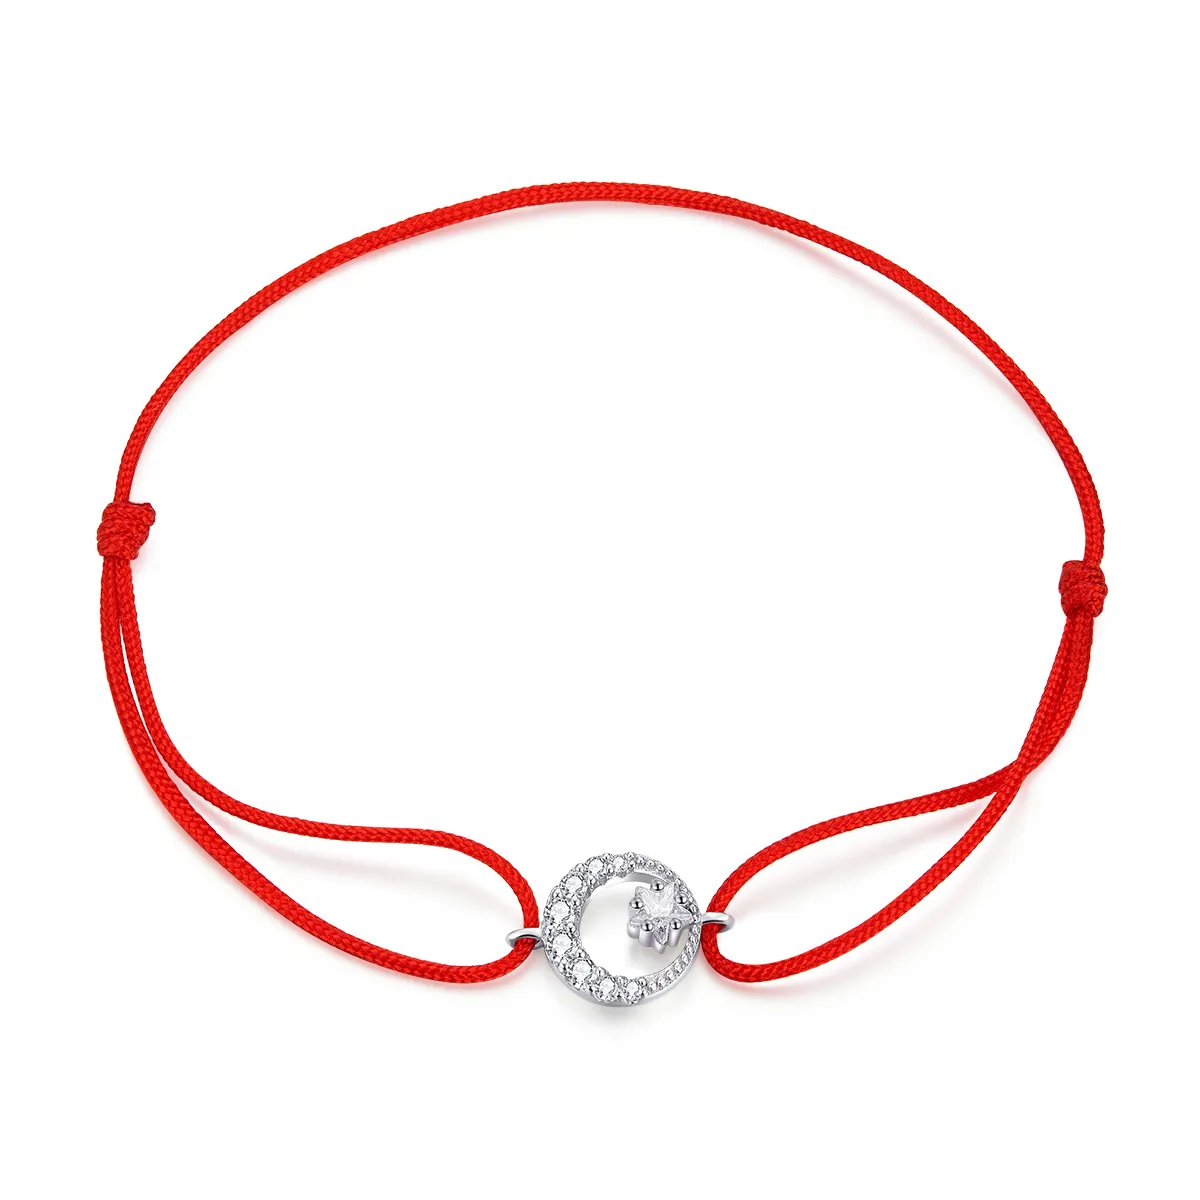 Red Rope with Silver Star In Moonlight E Clasp Bracelet - SCB177